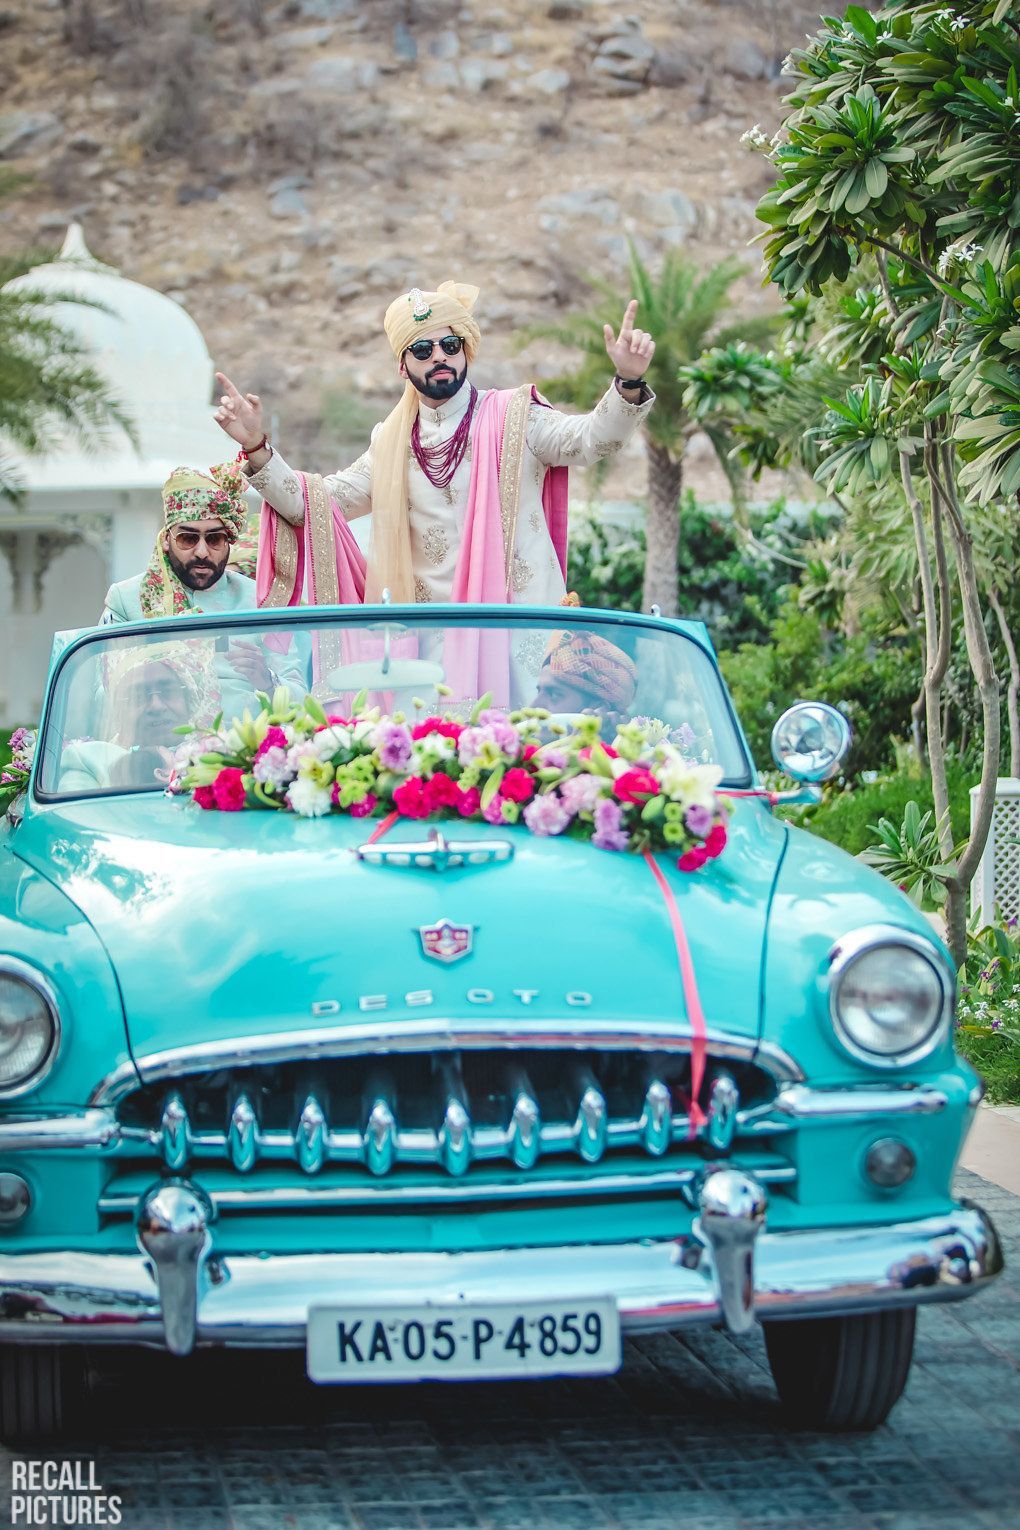 Places To Rent Vintage Cars For Baraat In Mumbai & Delhi